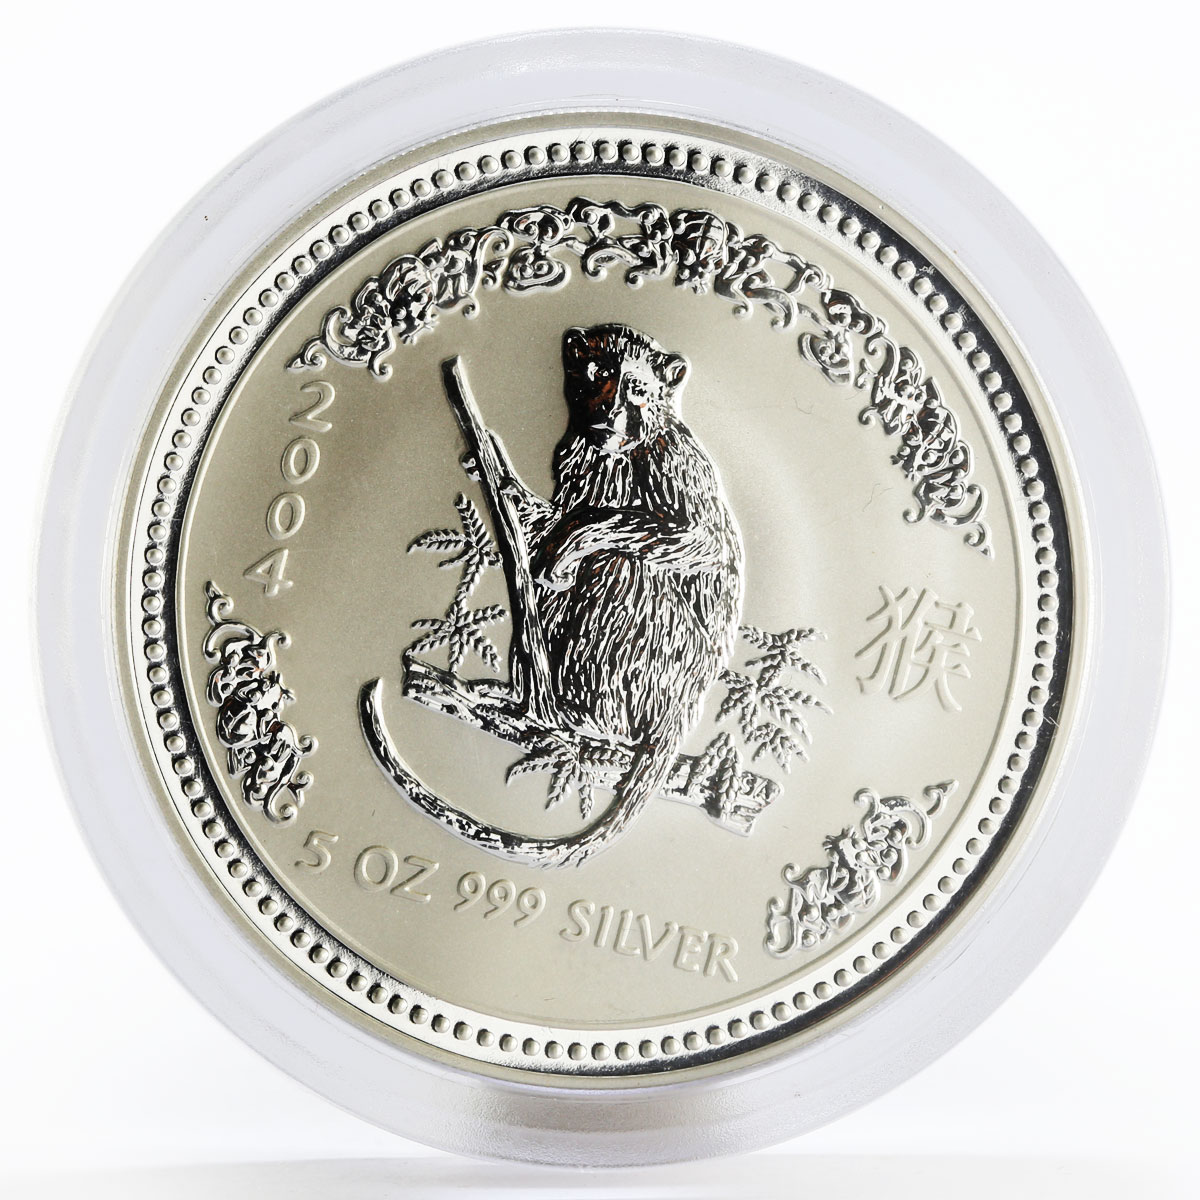 Australia 8 dollars Lunar series I Year of the Monkey silver coin 2004